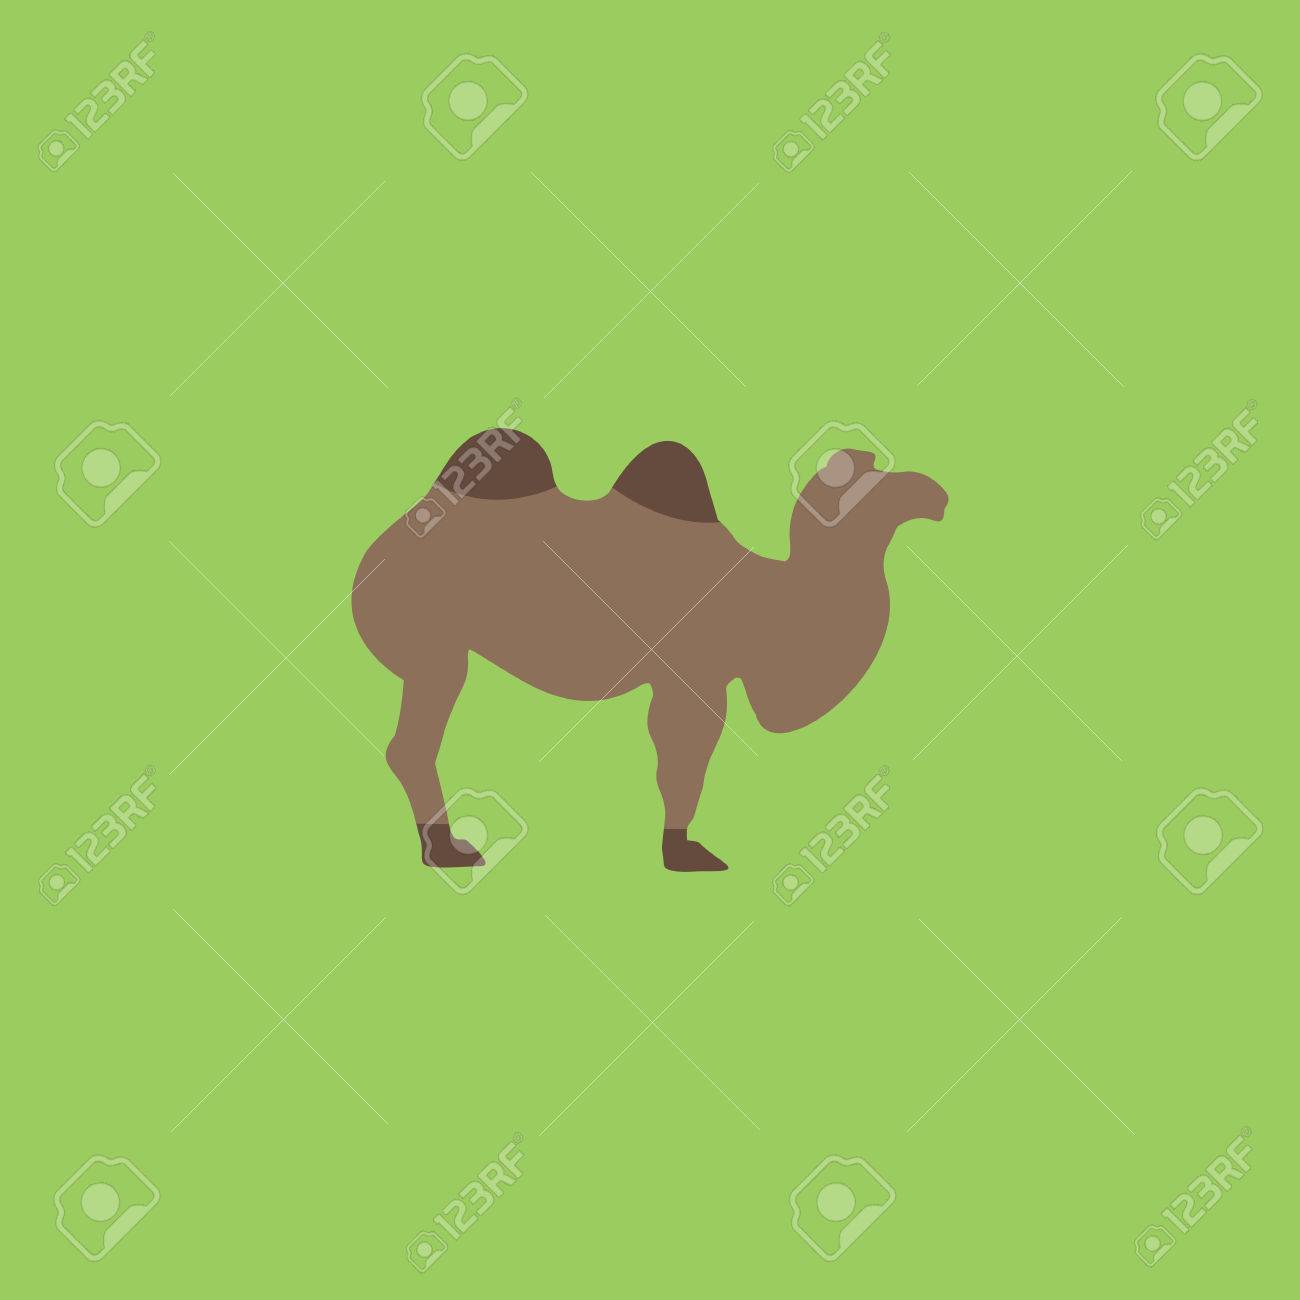 Camel clipart colorful. Camels free on dumielauxepices